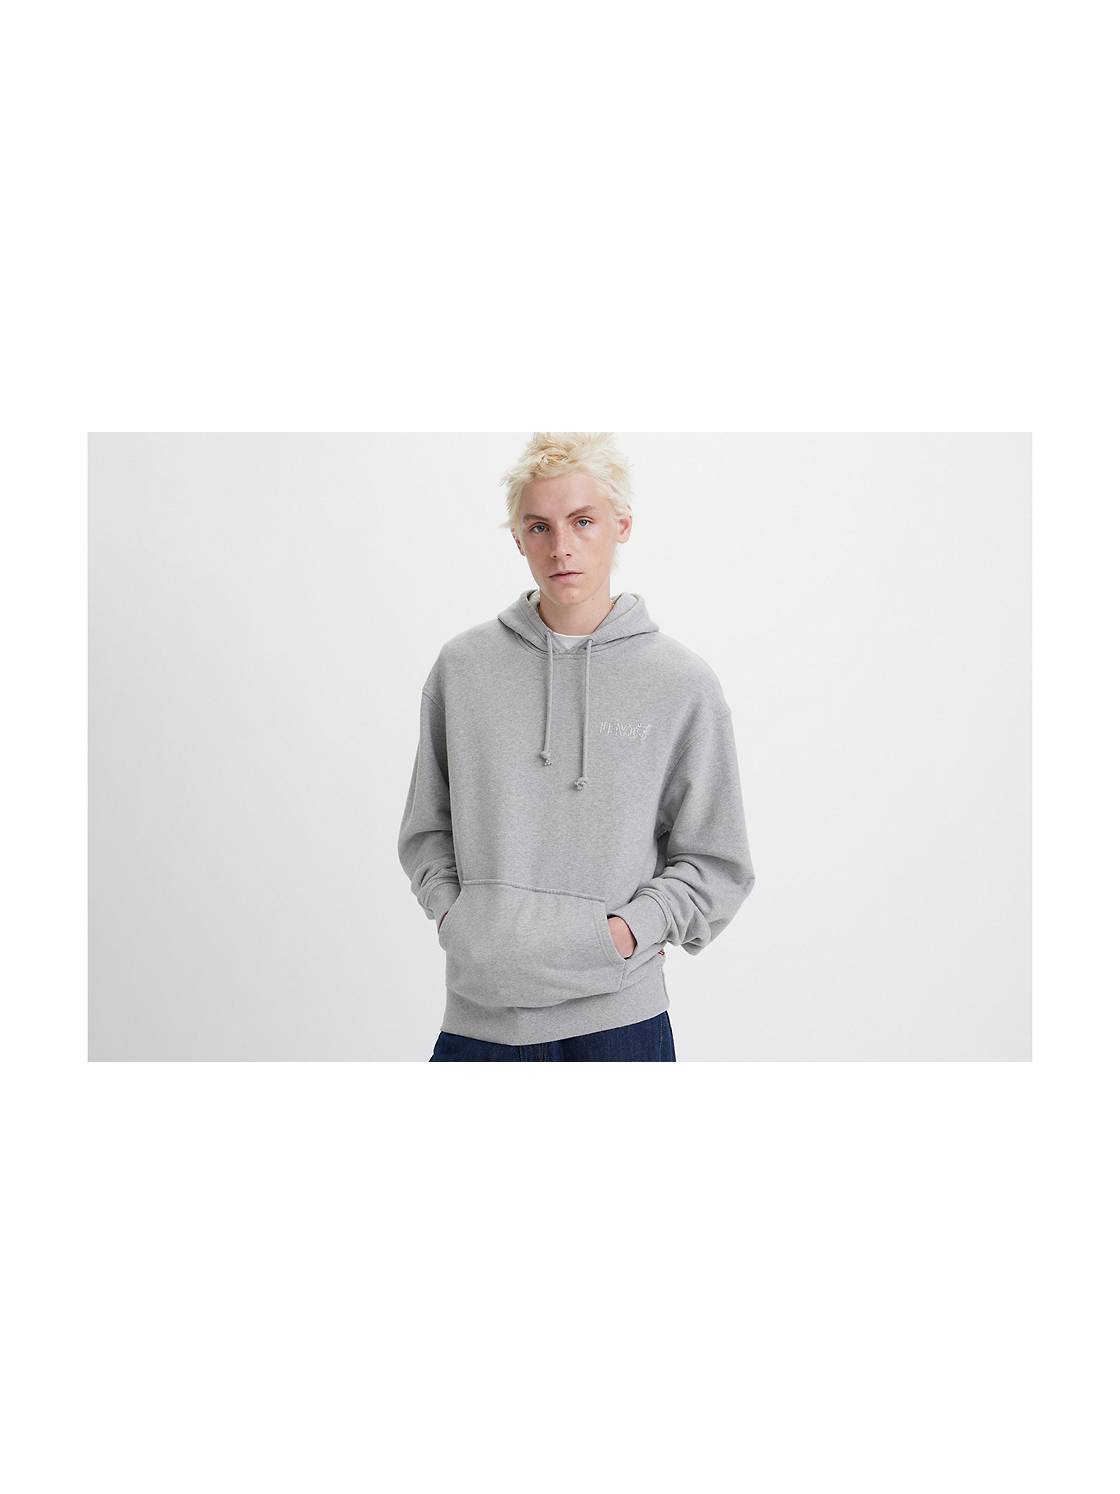 Levi's Graphic Hoodie - Men's - Two Color Heather Grey M